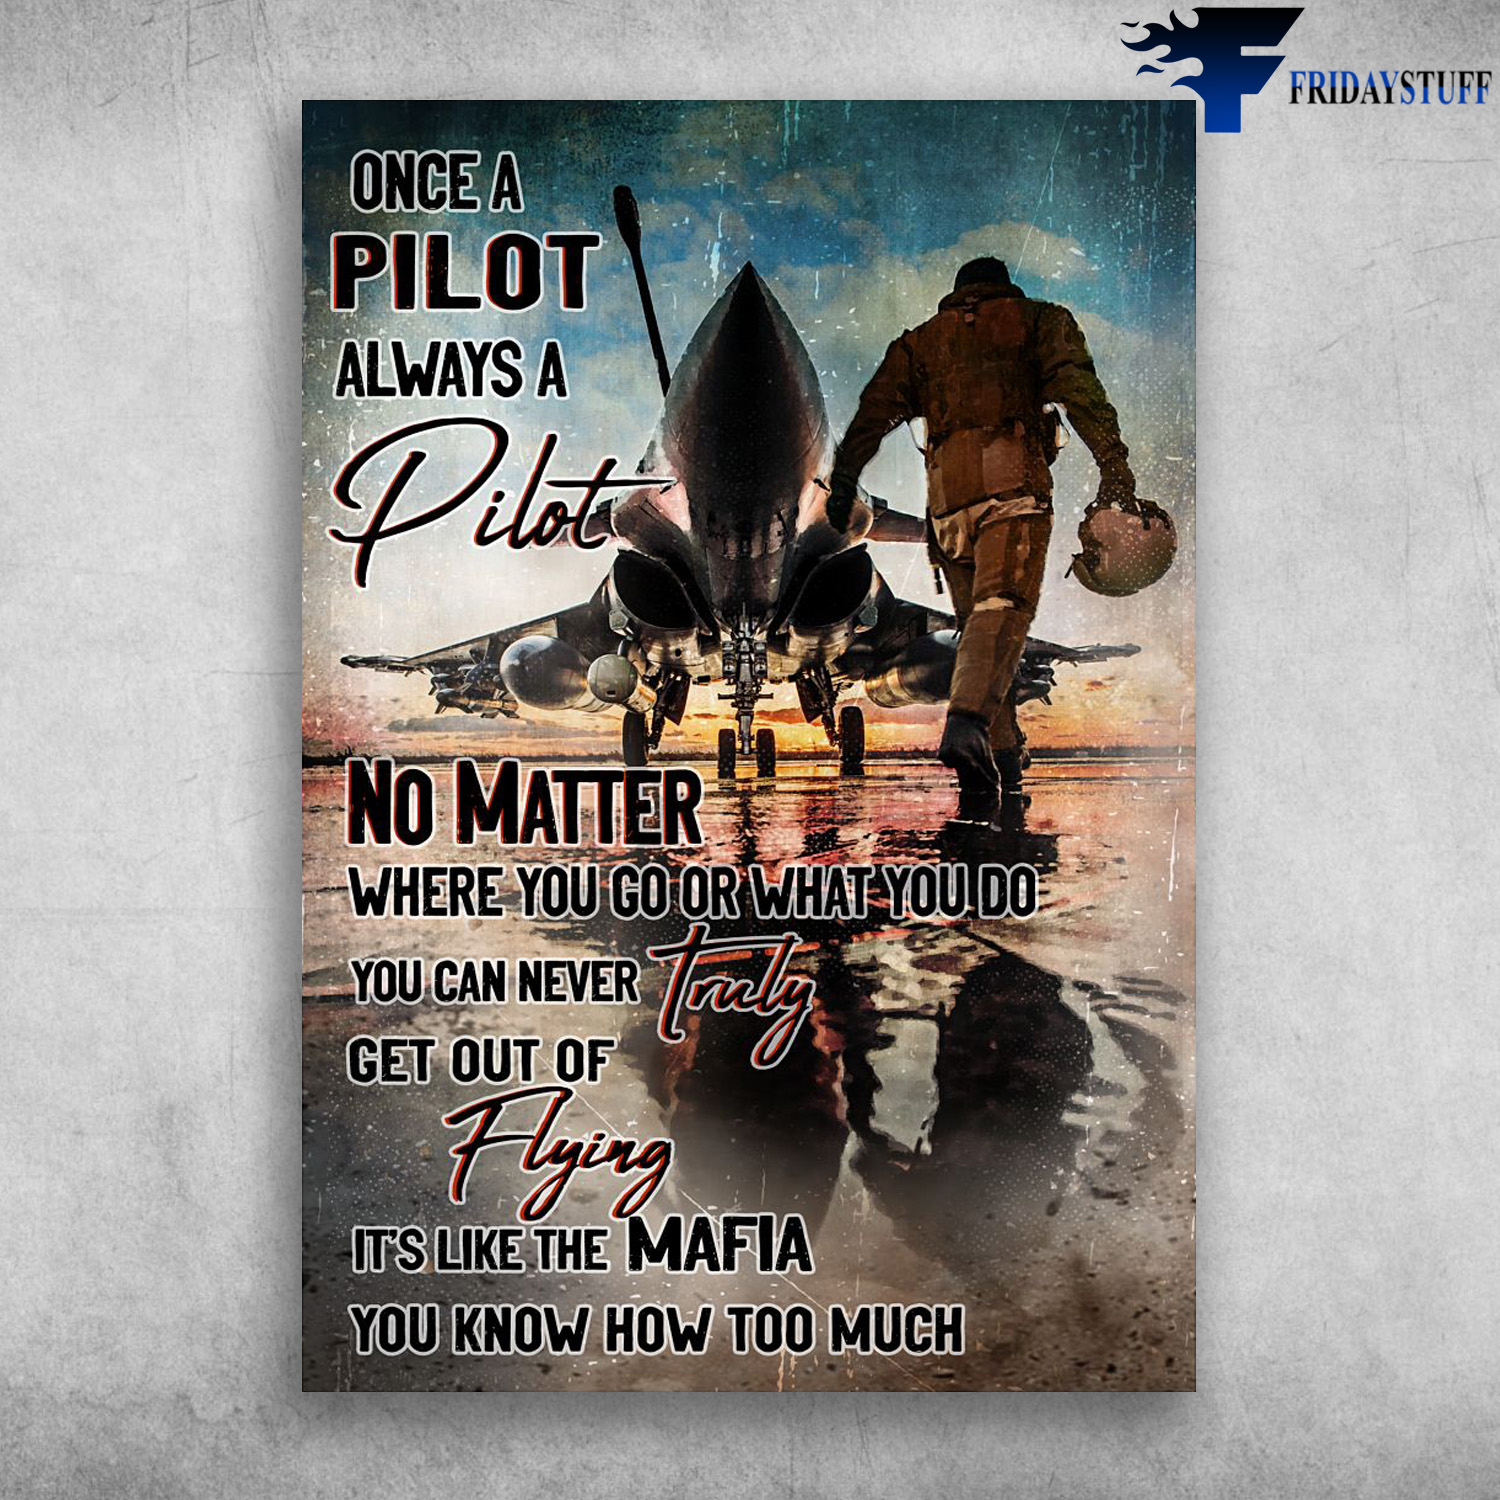 Pilot Man, Aircraft Pilot - Once A Pilot, Always A Pilot, No Matter Where You Go, Or What You Do, You Can Never Truly, Get Out Of Flying, It's Like The Mafia, You Know How Too Much